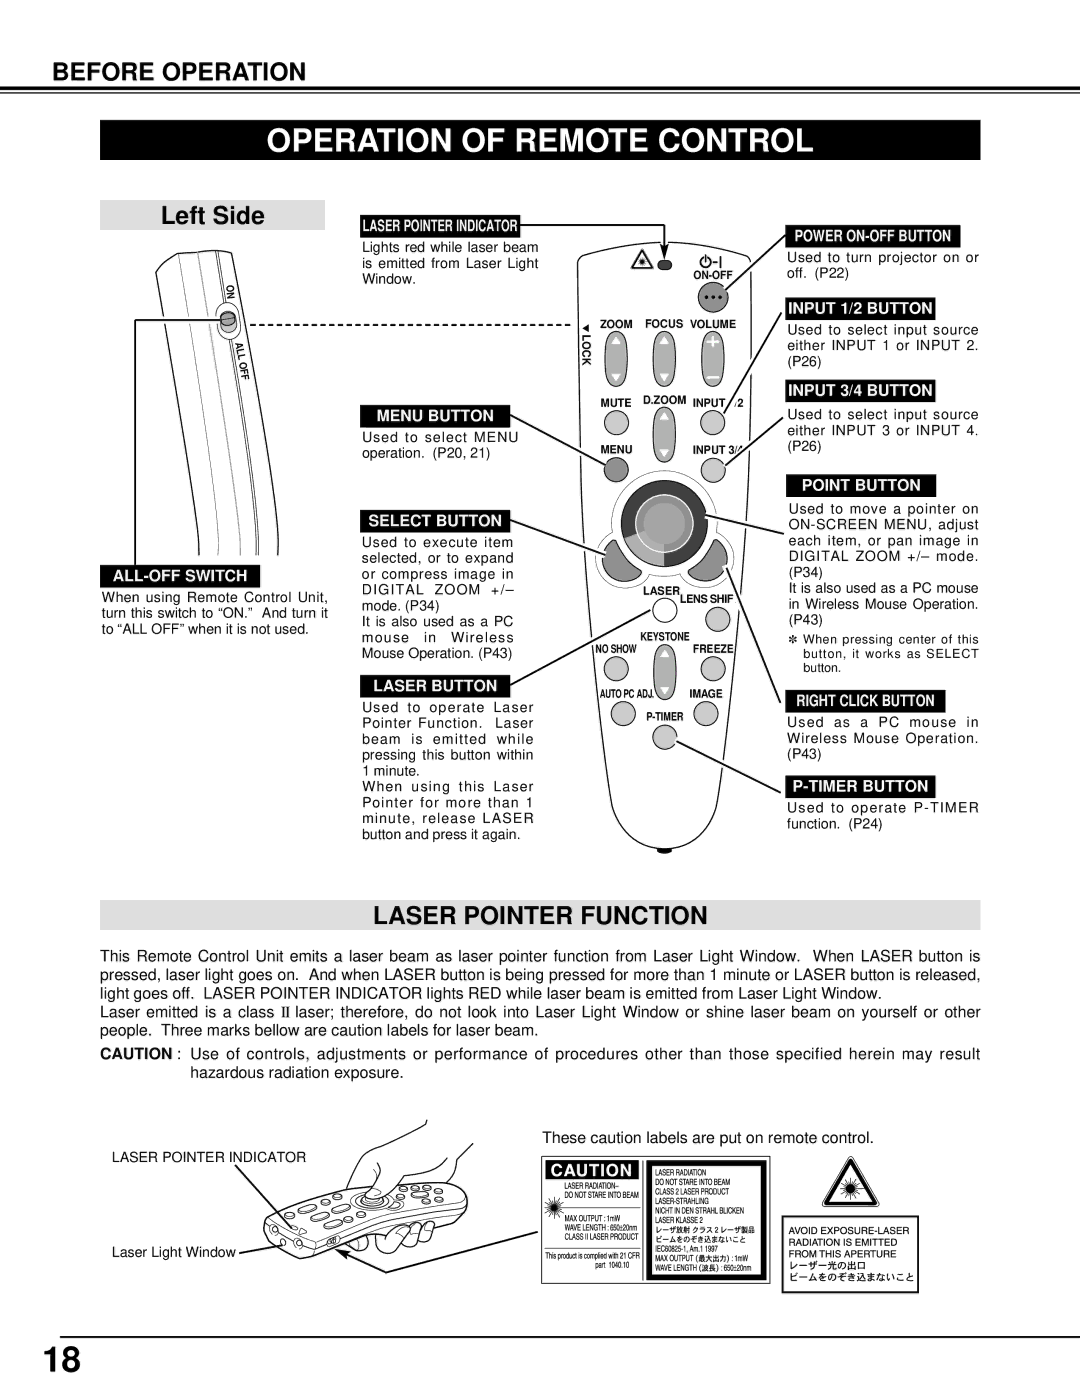 Eiki LC-XT3 instruction manual Operation of Remote Control, Laser Pointer Function 